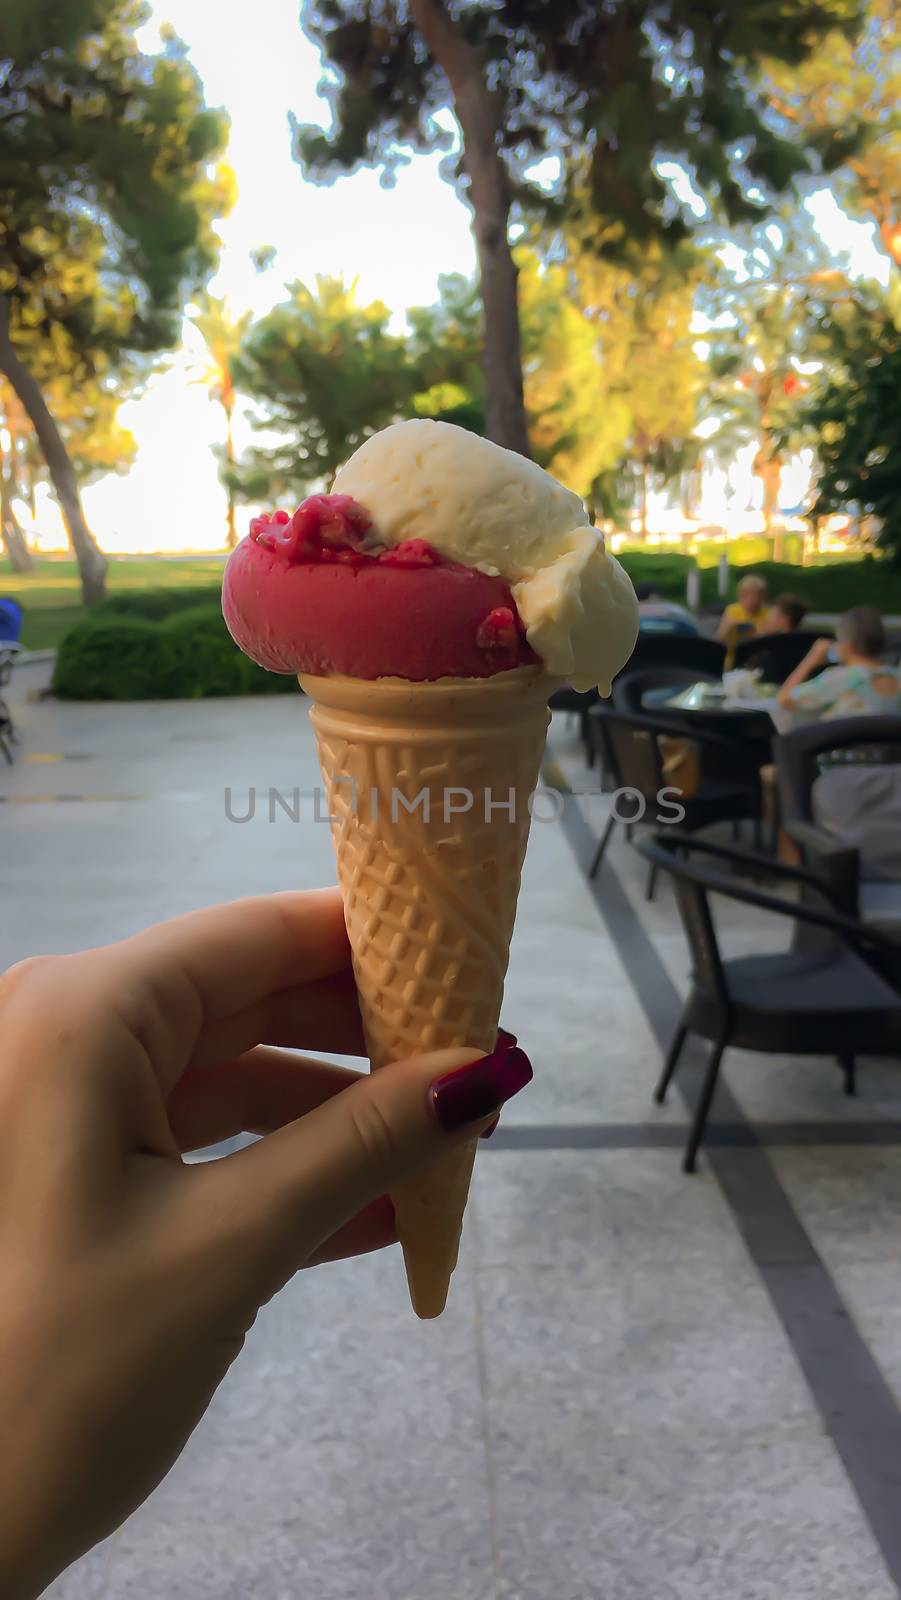 Colorful ice cream in a waffle cone in a girl's hand